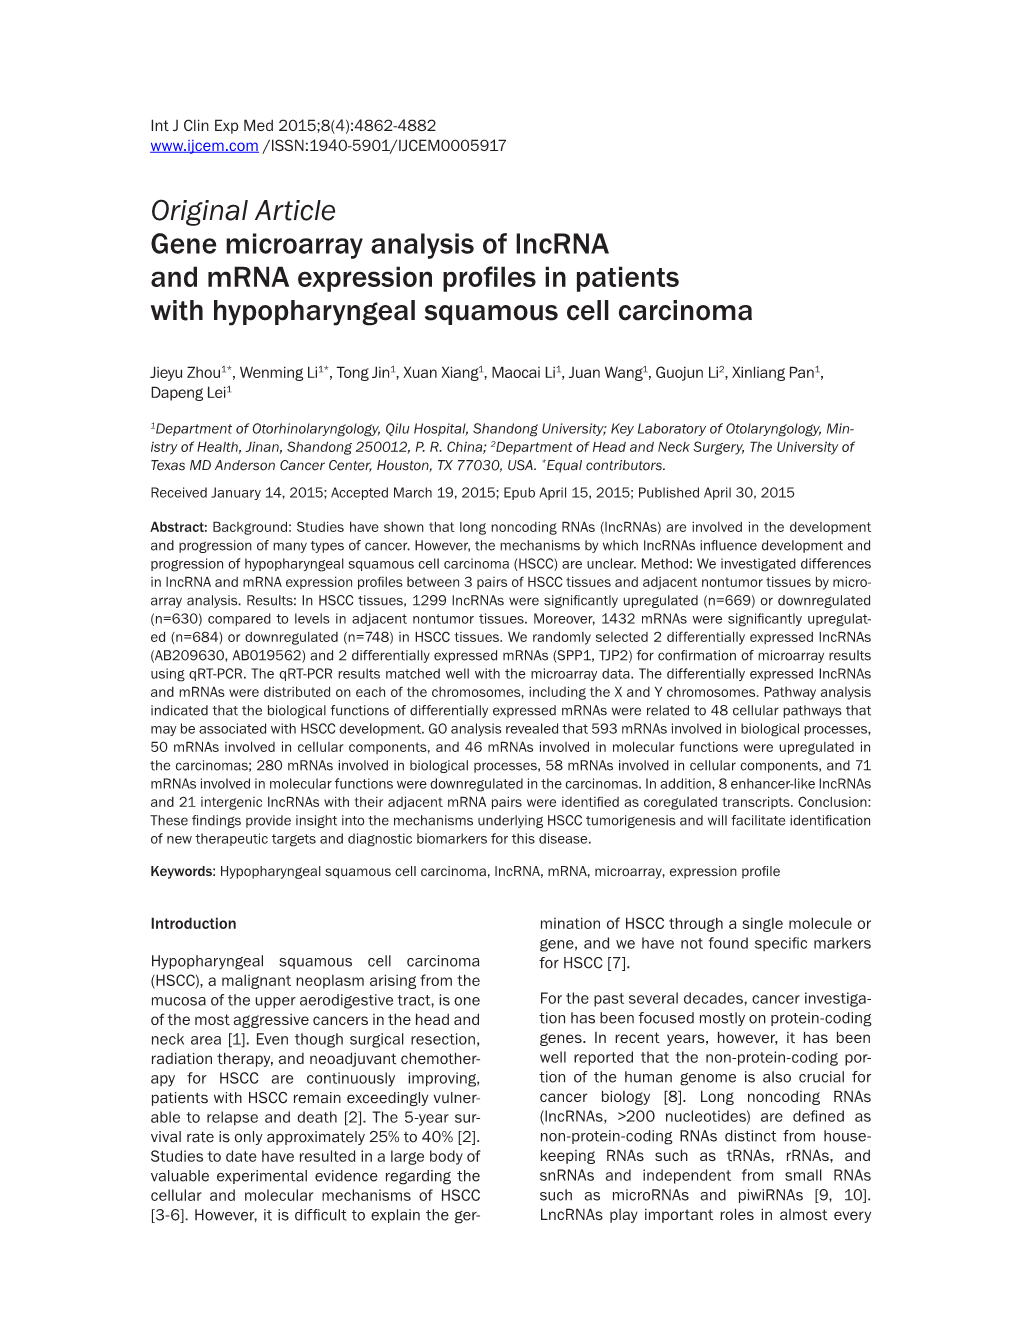 Original Article Gene Microarray Analysis of Lncrna and Mrna Expression Profiles in Patients with Hypopharyngeal Squamous Cell Carcinoma